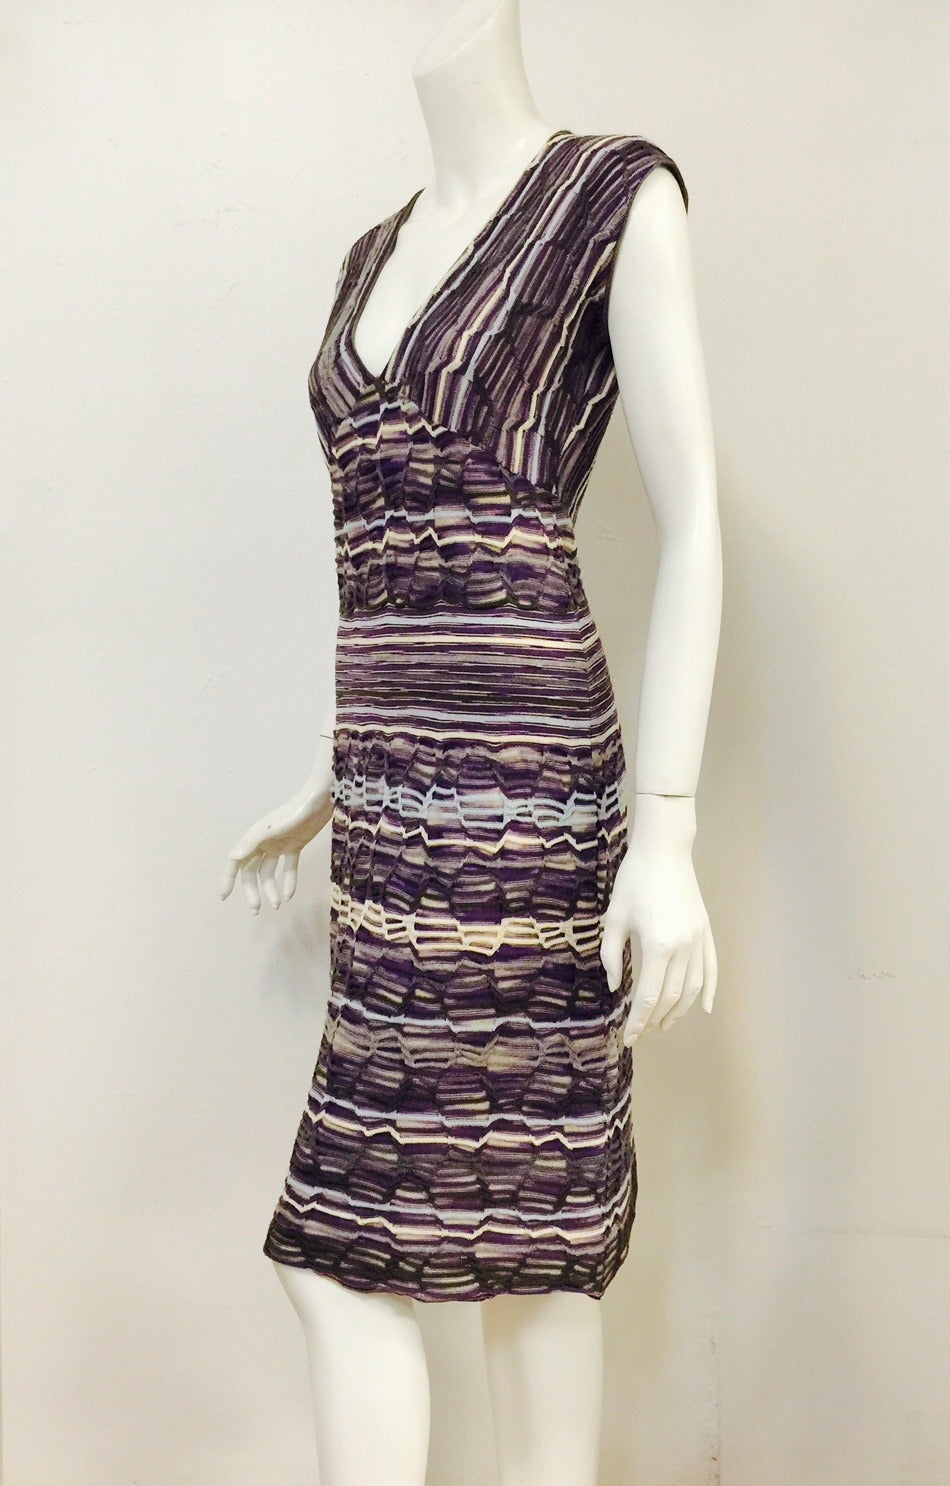 M Missoni Multi Color Cap Sleeve Knit Dress In Excellent Condition For Sale In Palm Beach, FL